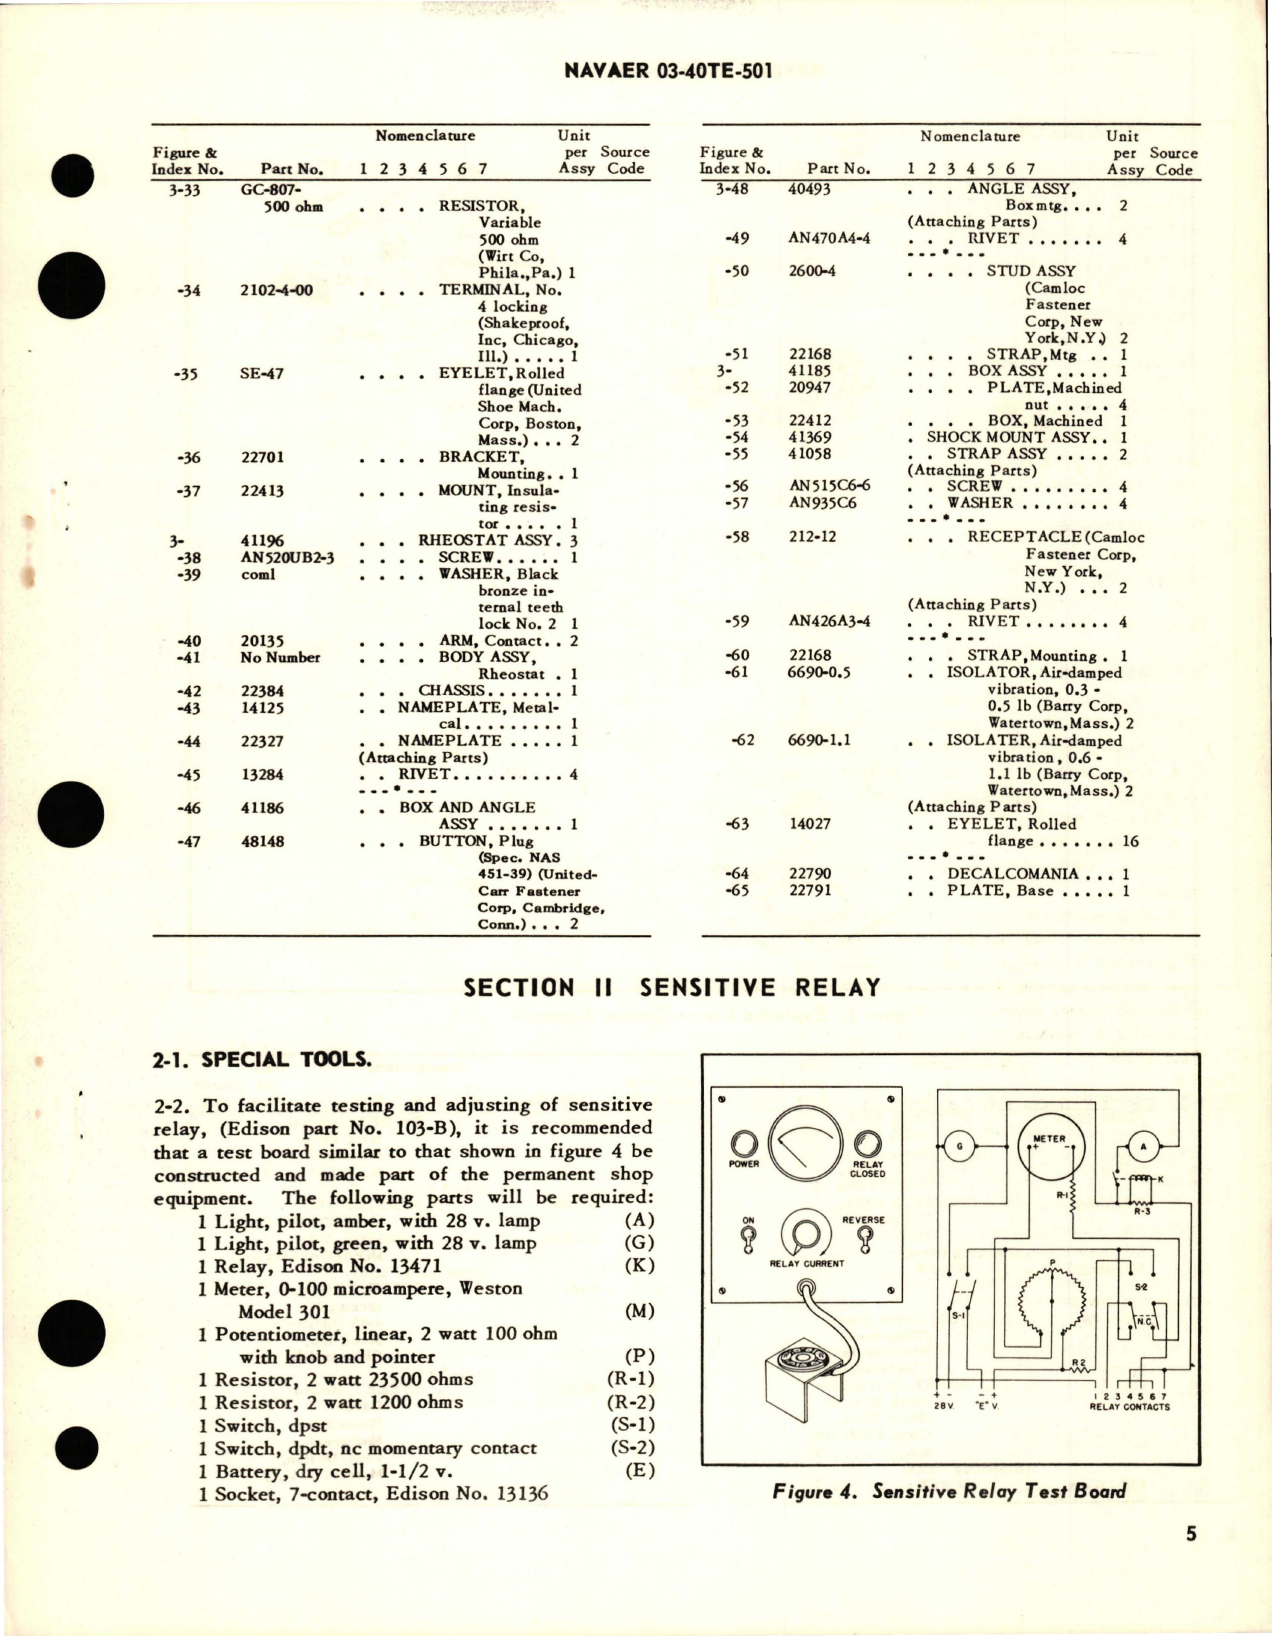 Sample page 5 from AirCorps Library document: Overhaul Instructions with Parts Breakdown for Temperature Indicating & Alarm System Control Assembly - 183-6X 